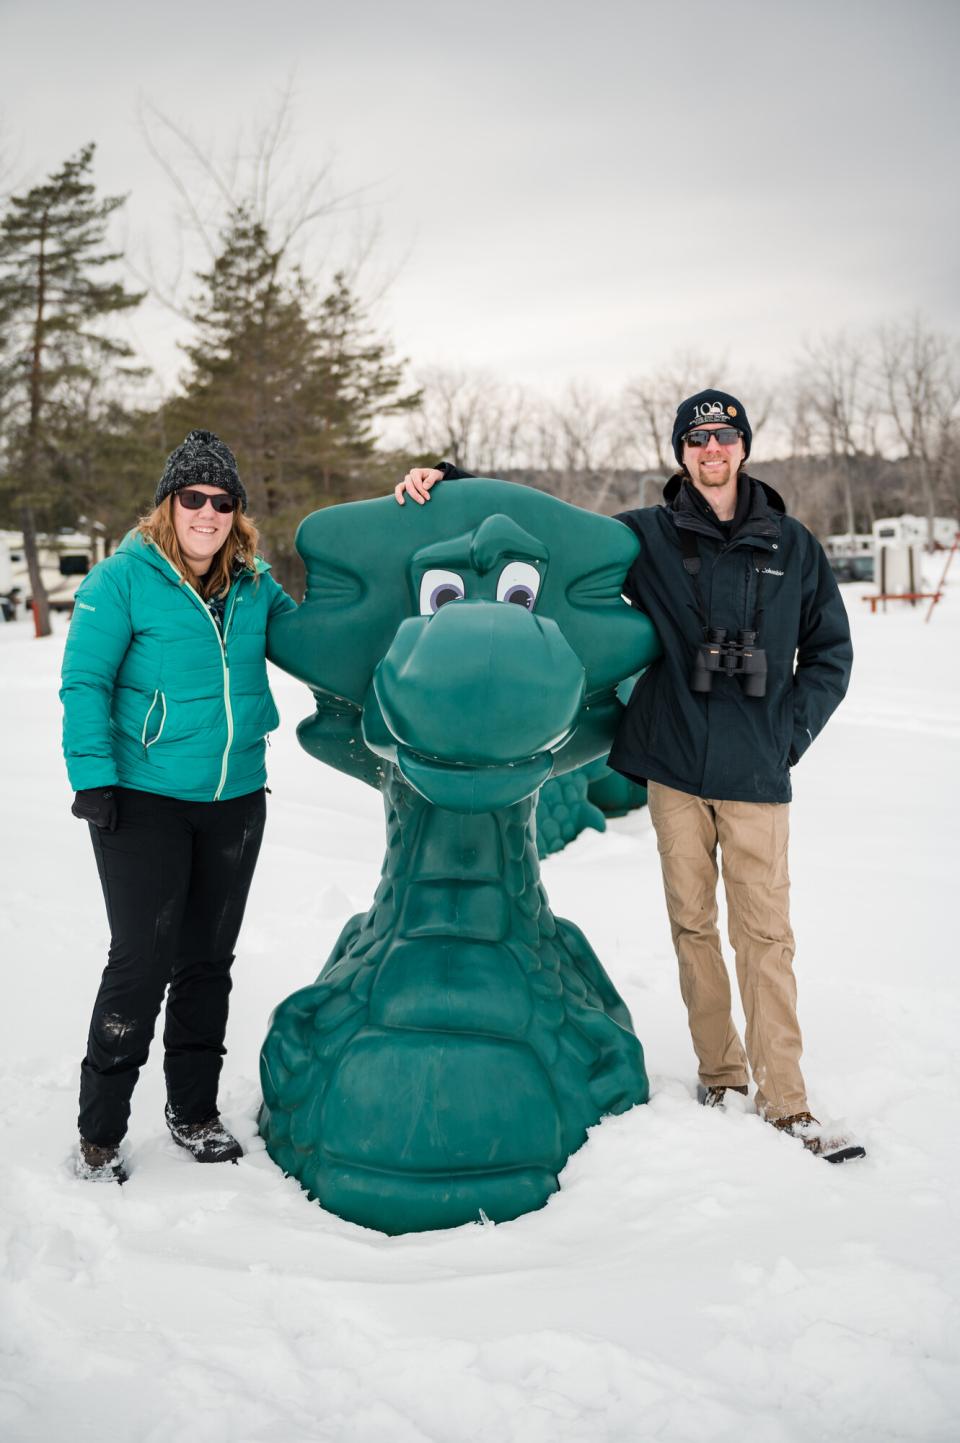 A man and woman pose next to a statue of a green lake monster.